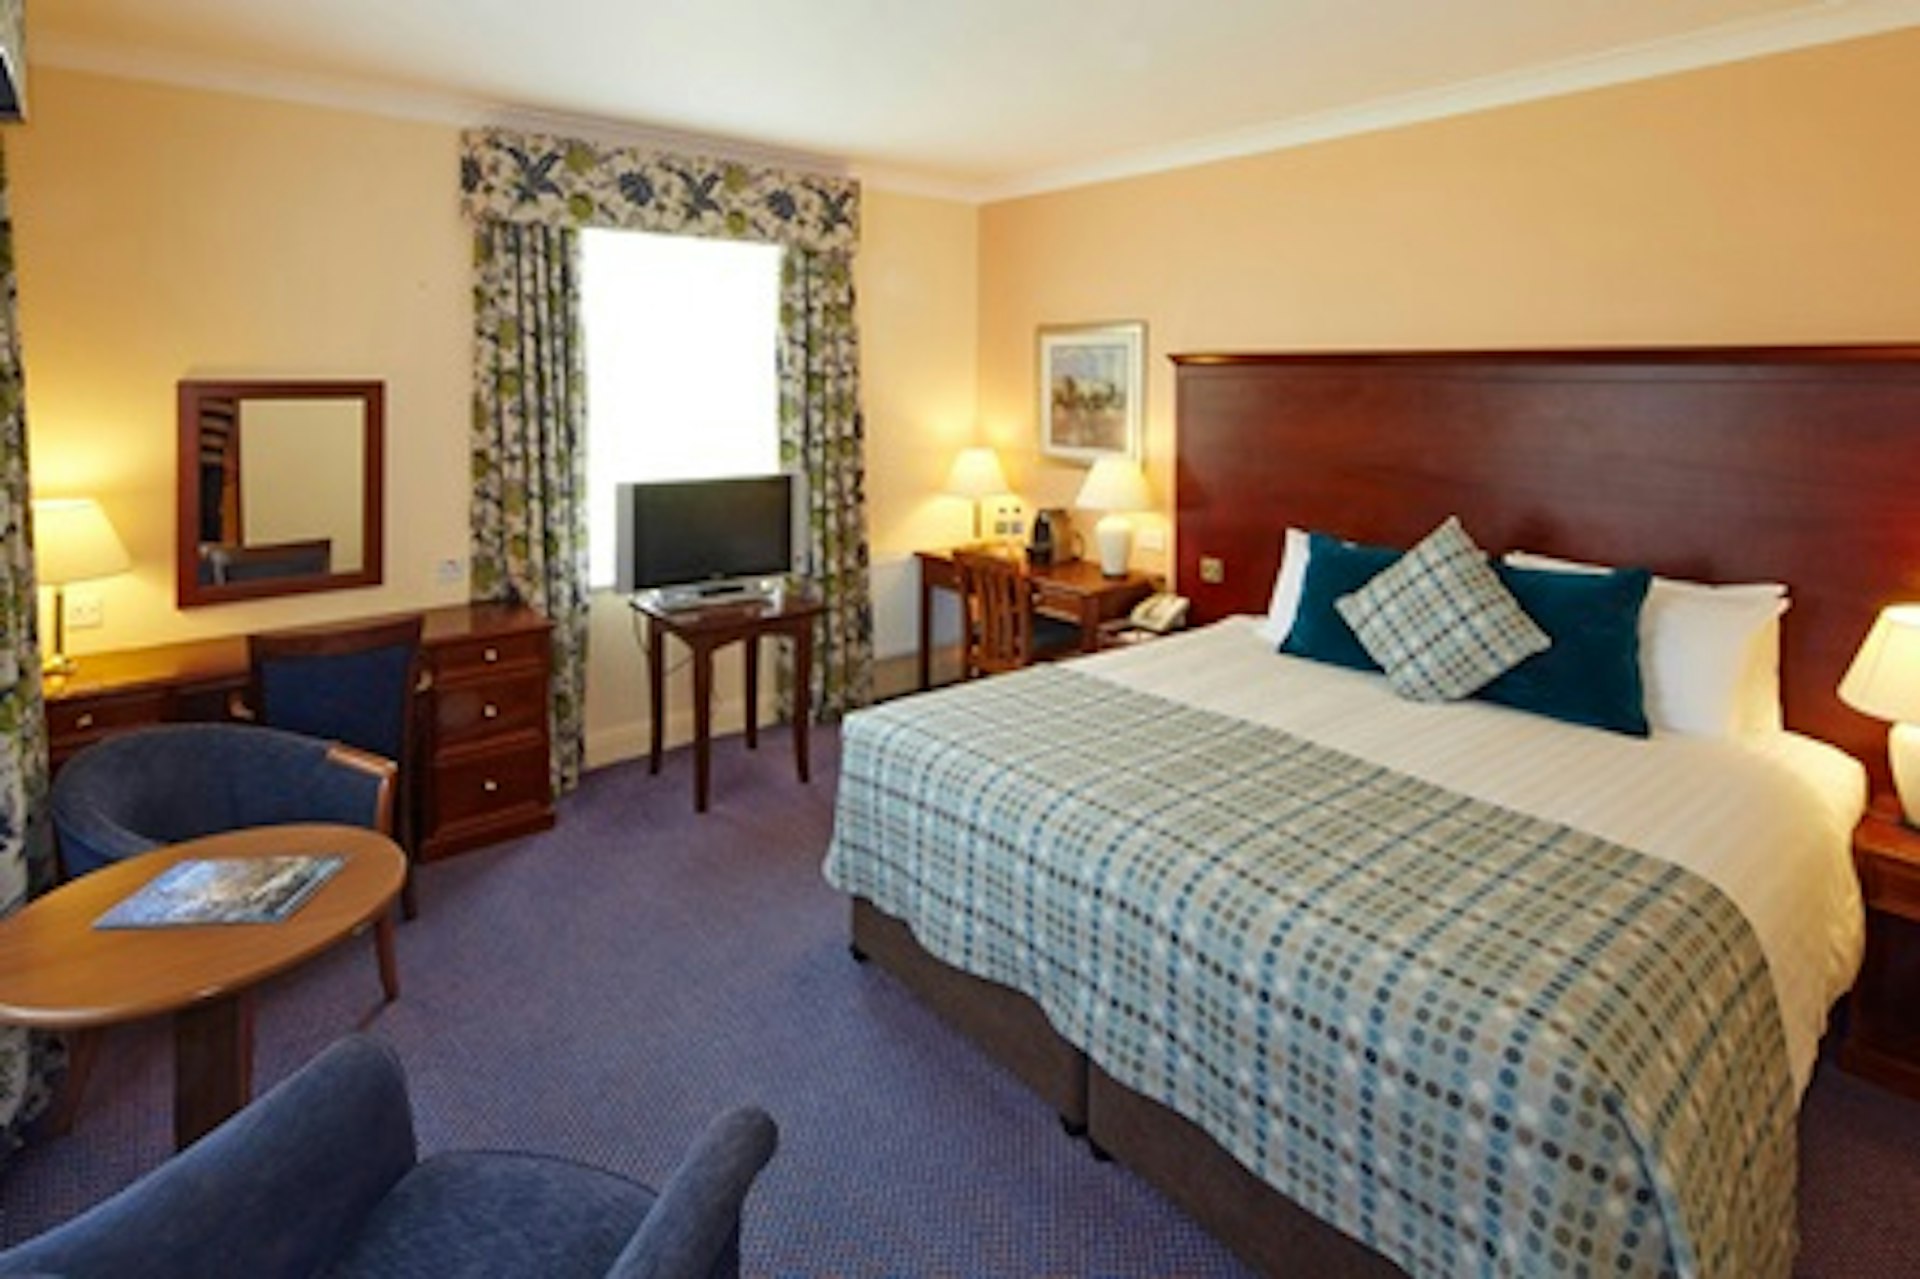 One Night Break for Two at the Mercure Newbury Elcot Park Hotel 4